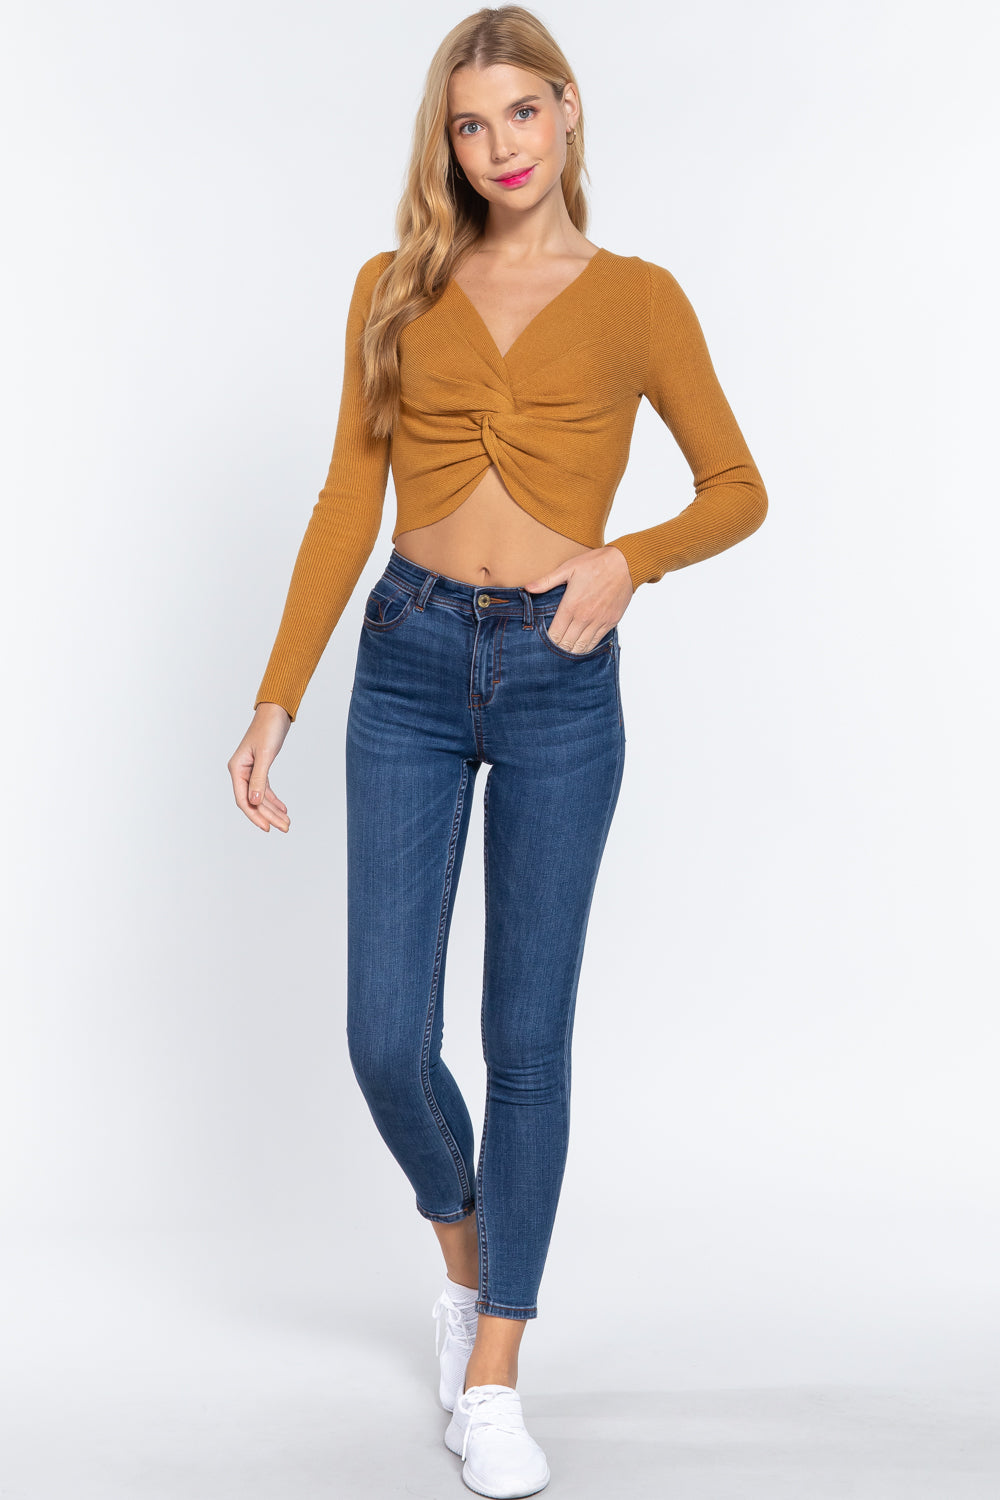 V-neck FrontTwist Knotted Crop Sweater